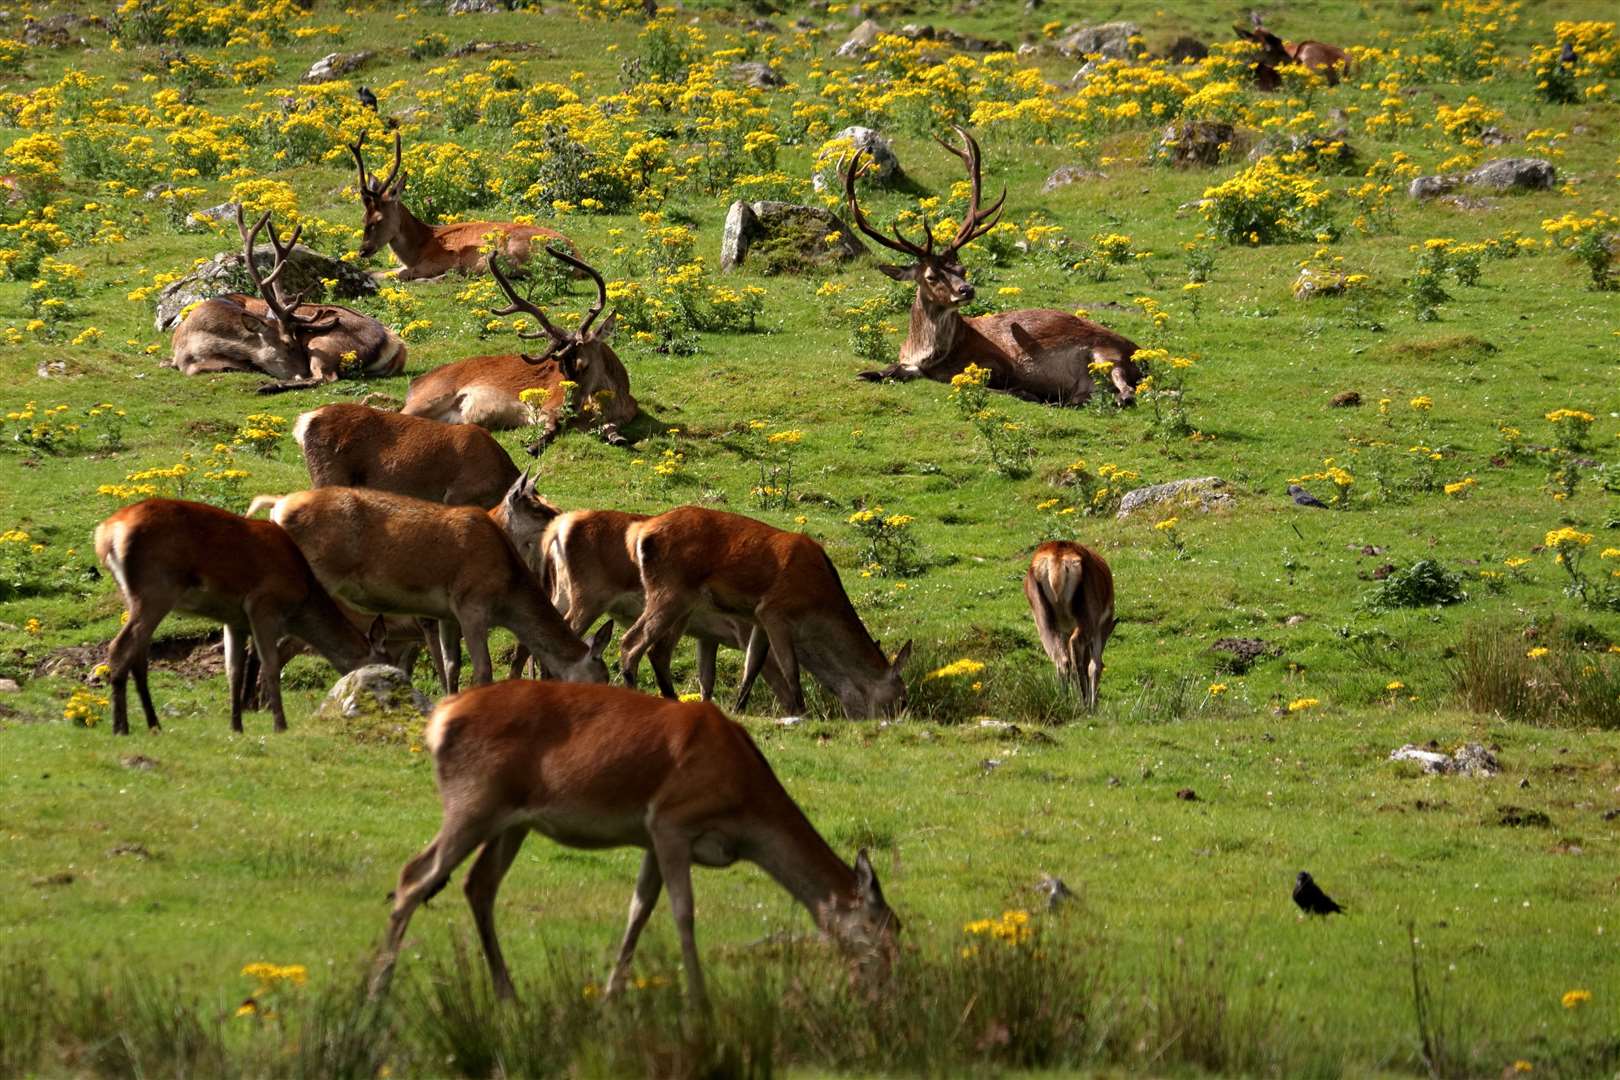 Deer are competing for grazing in the Rogart area and are a hazard on roads.